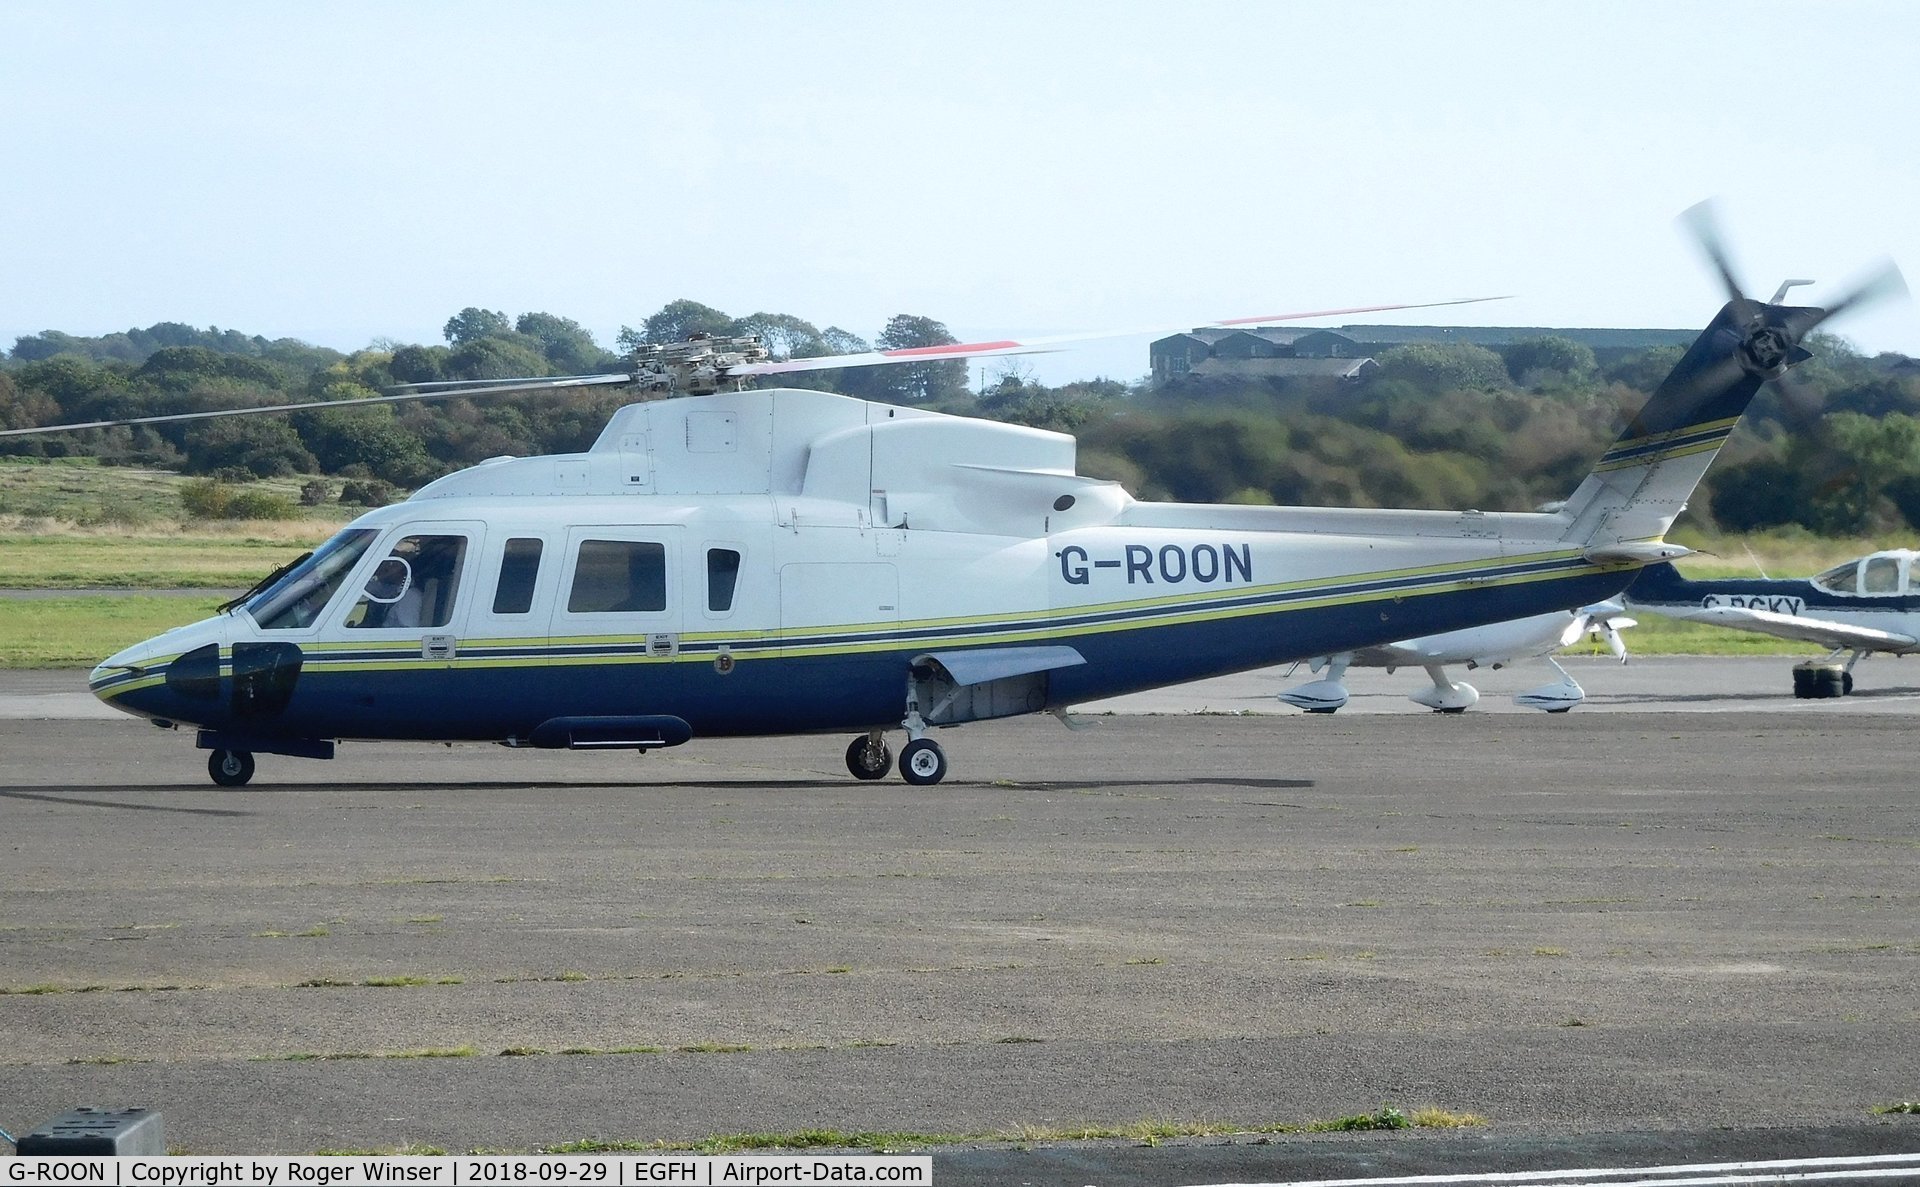 G-ROON, 2010 Keystone Helicopter S-76C C/N 760781, Visiting S-76C.